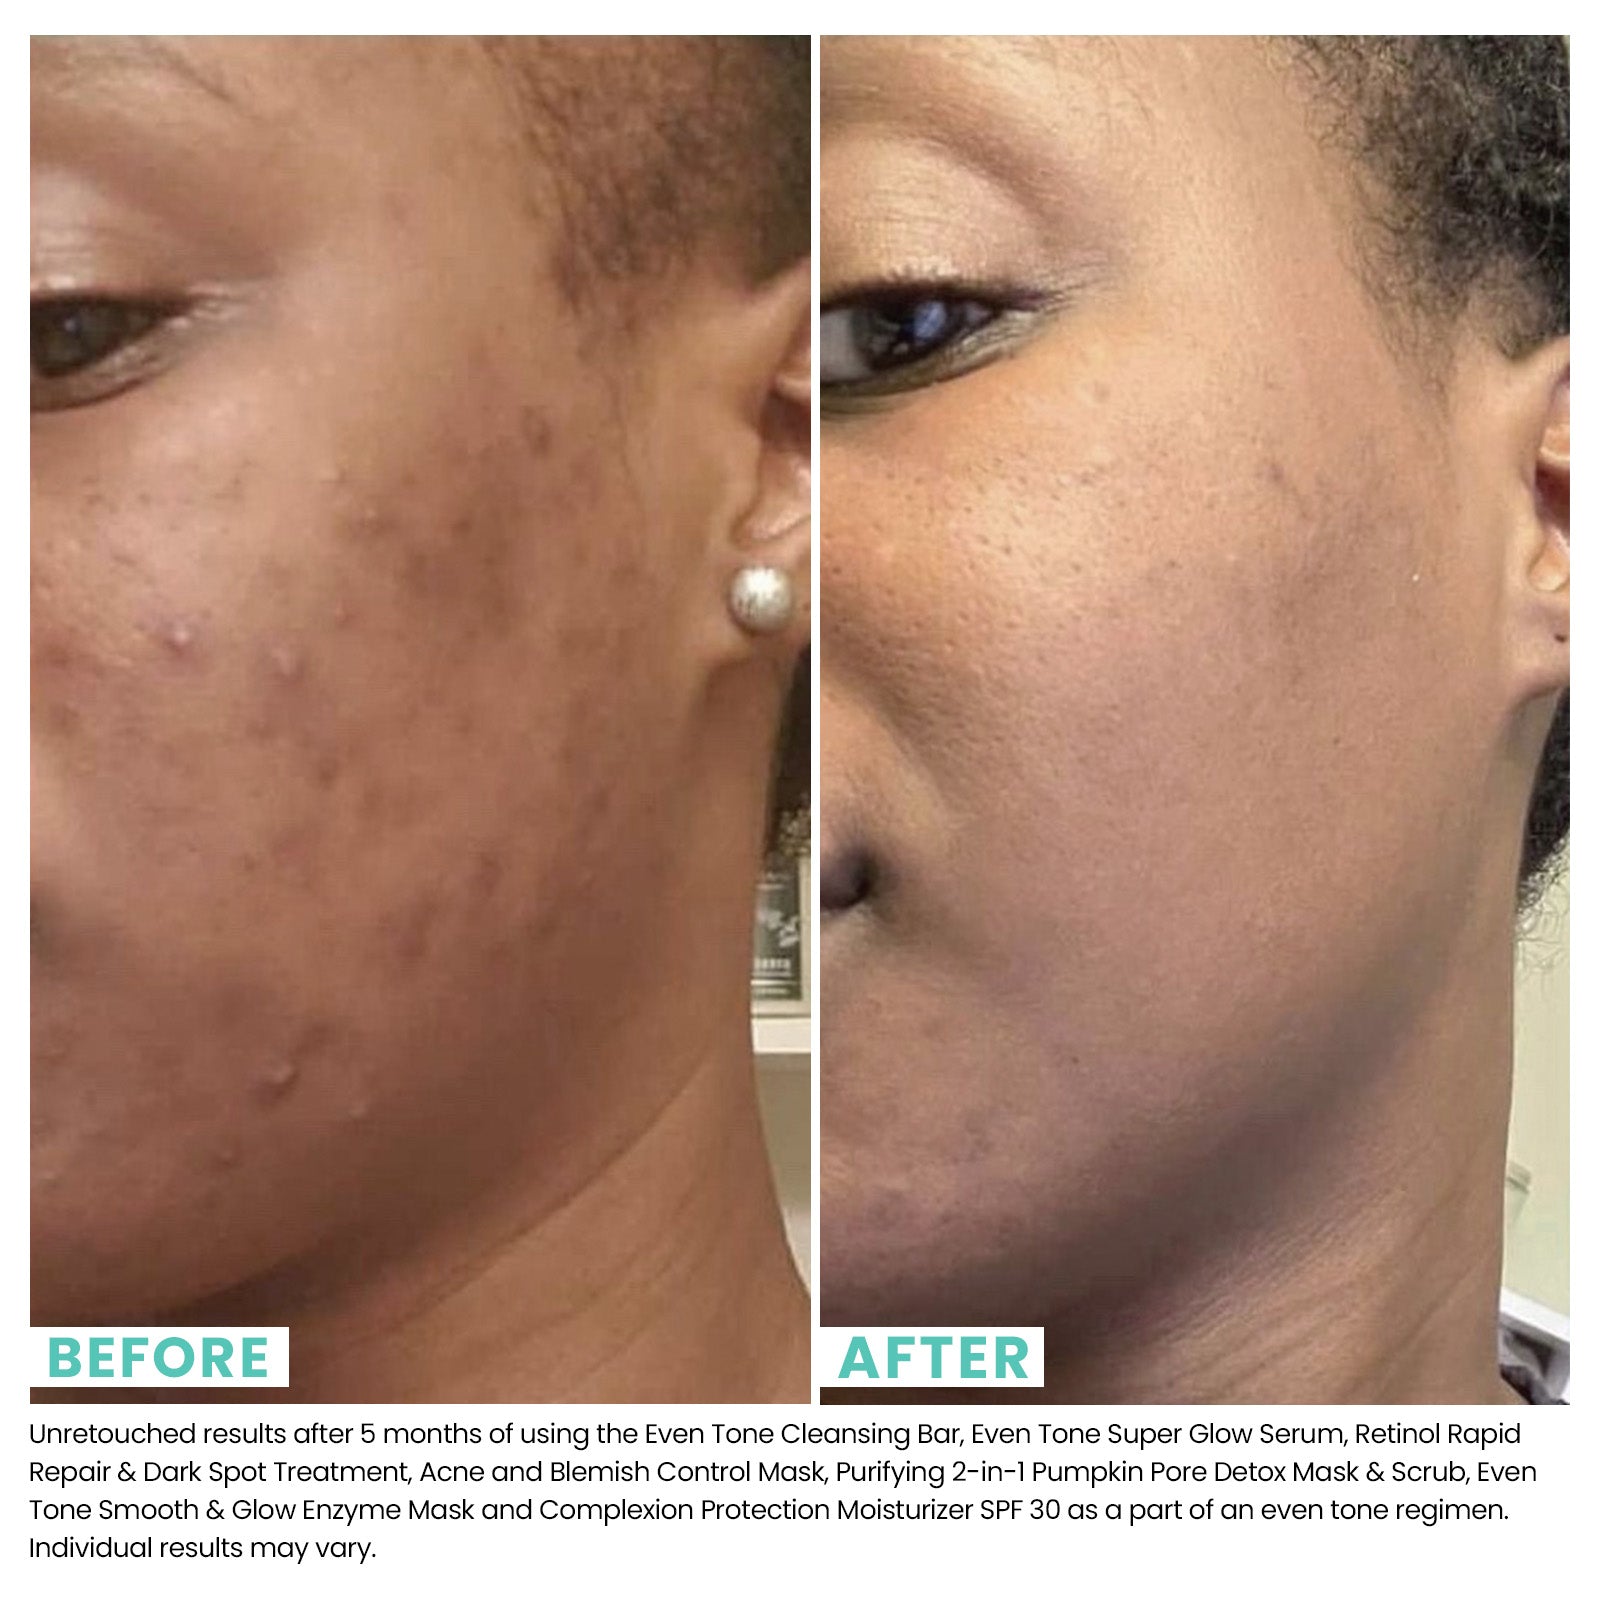 Blemish Mask: Acne and Acne Fighting | Urban Skin Rx